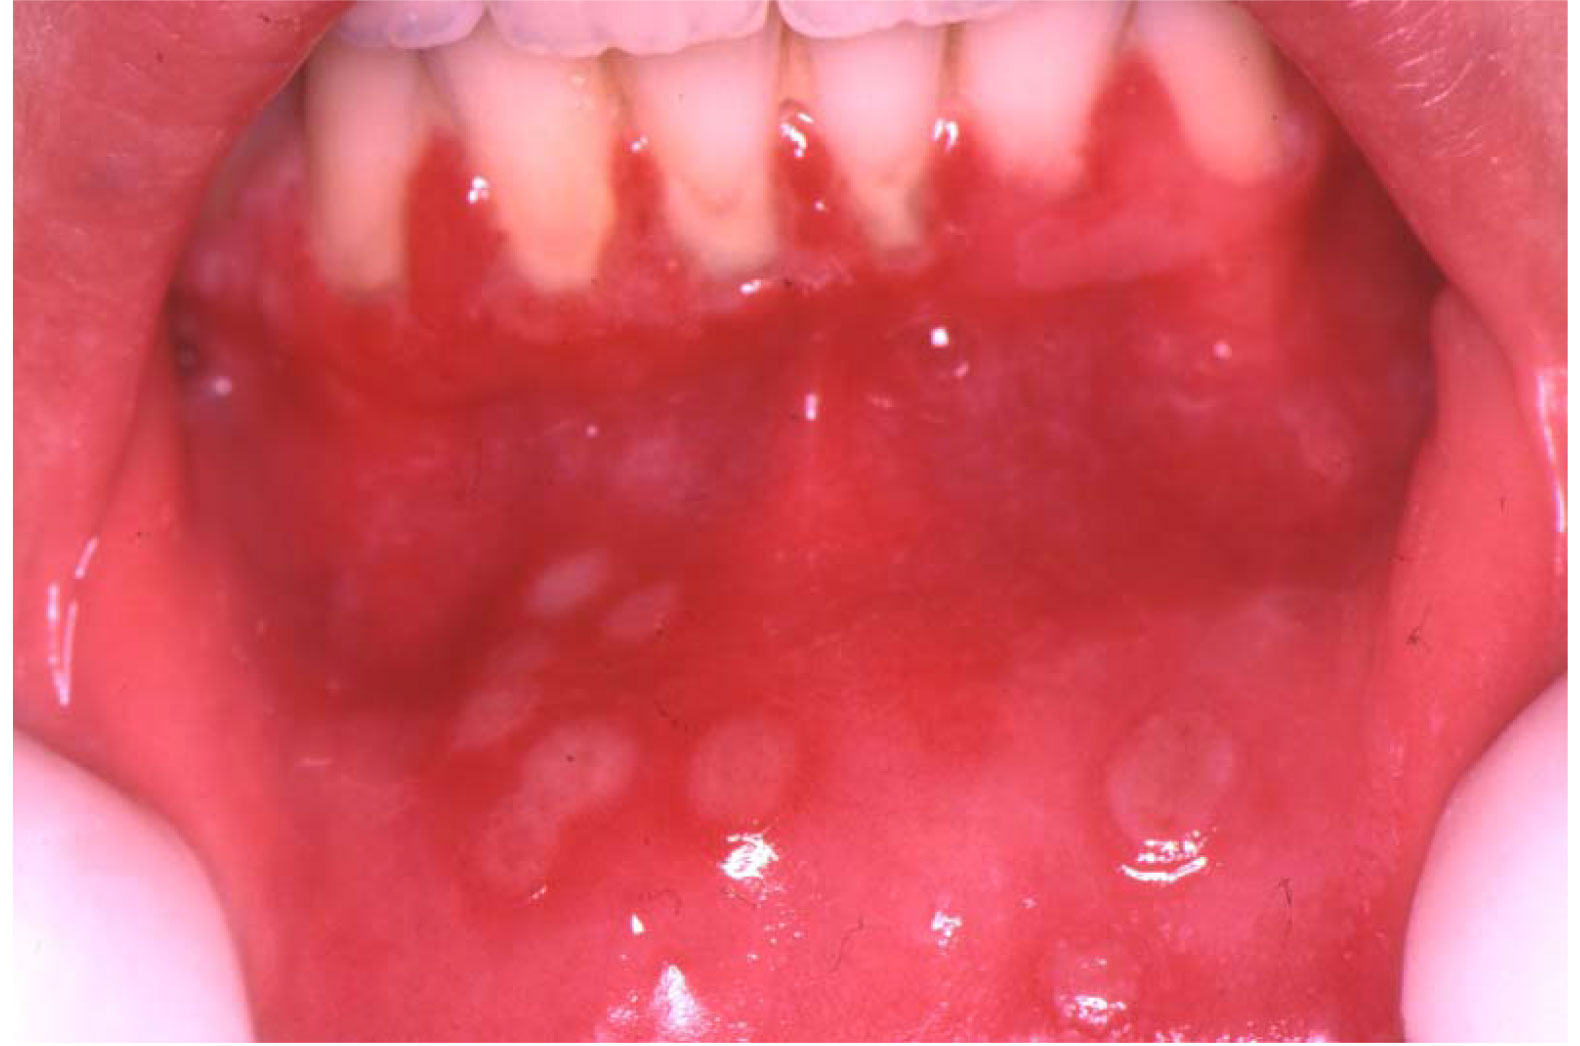 Herpes Simplex Virus Hsv Infection Of The Mouth European Association Of Oral Medicine